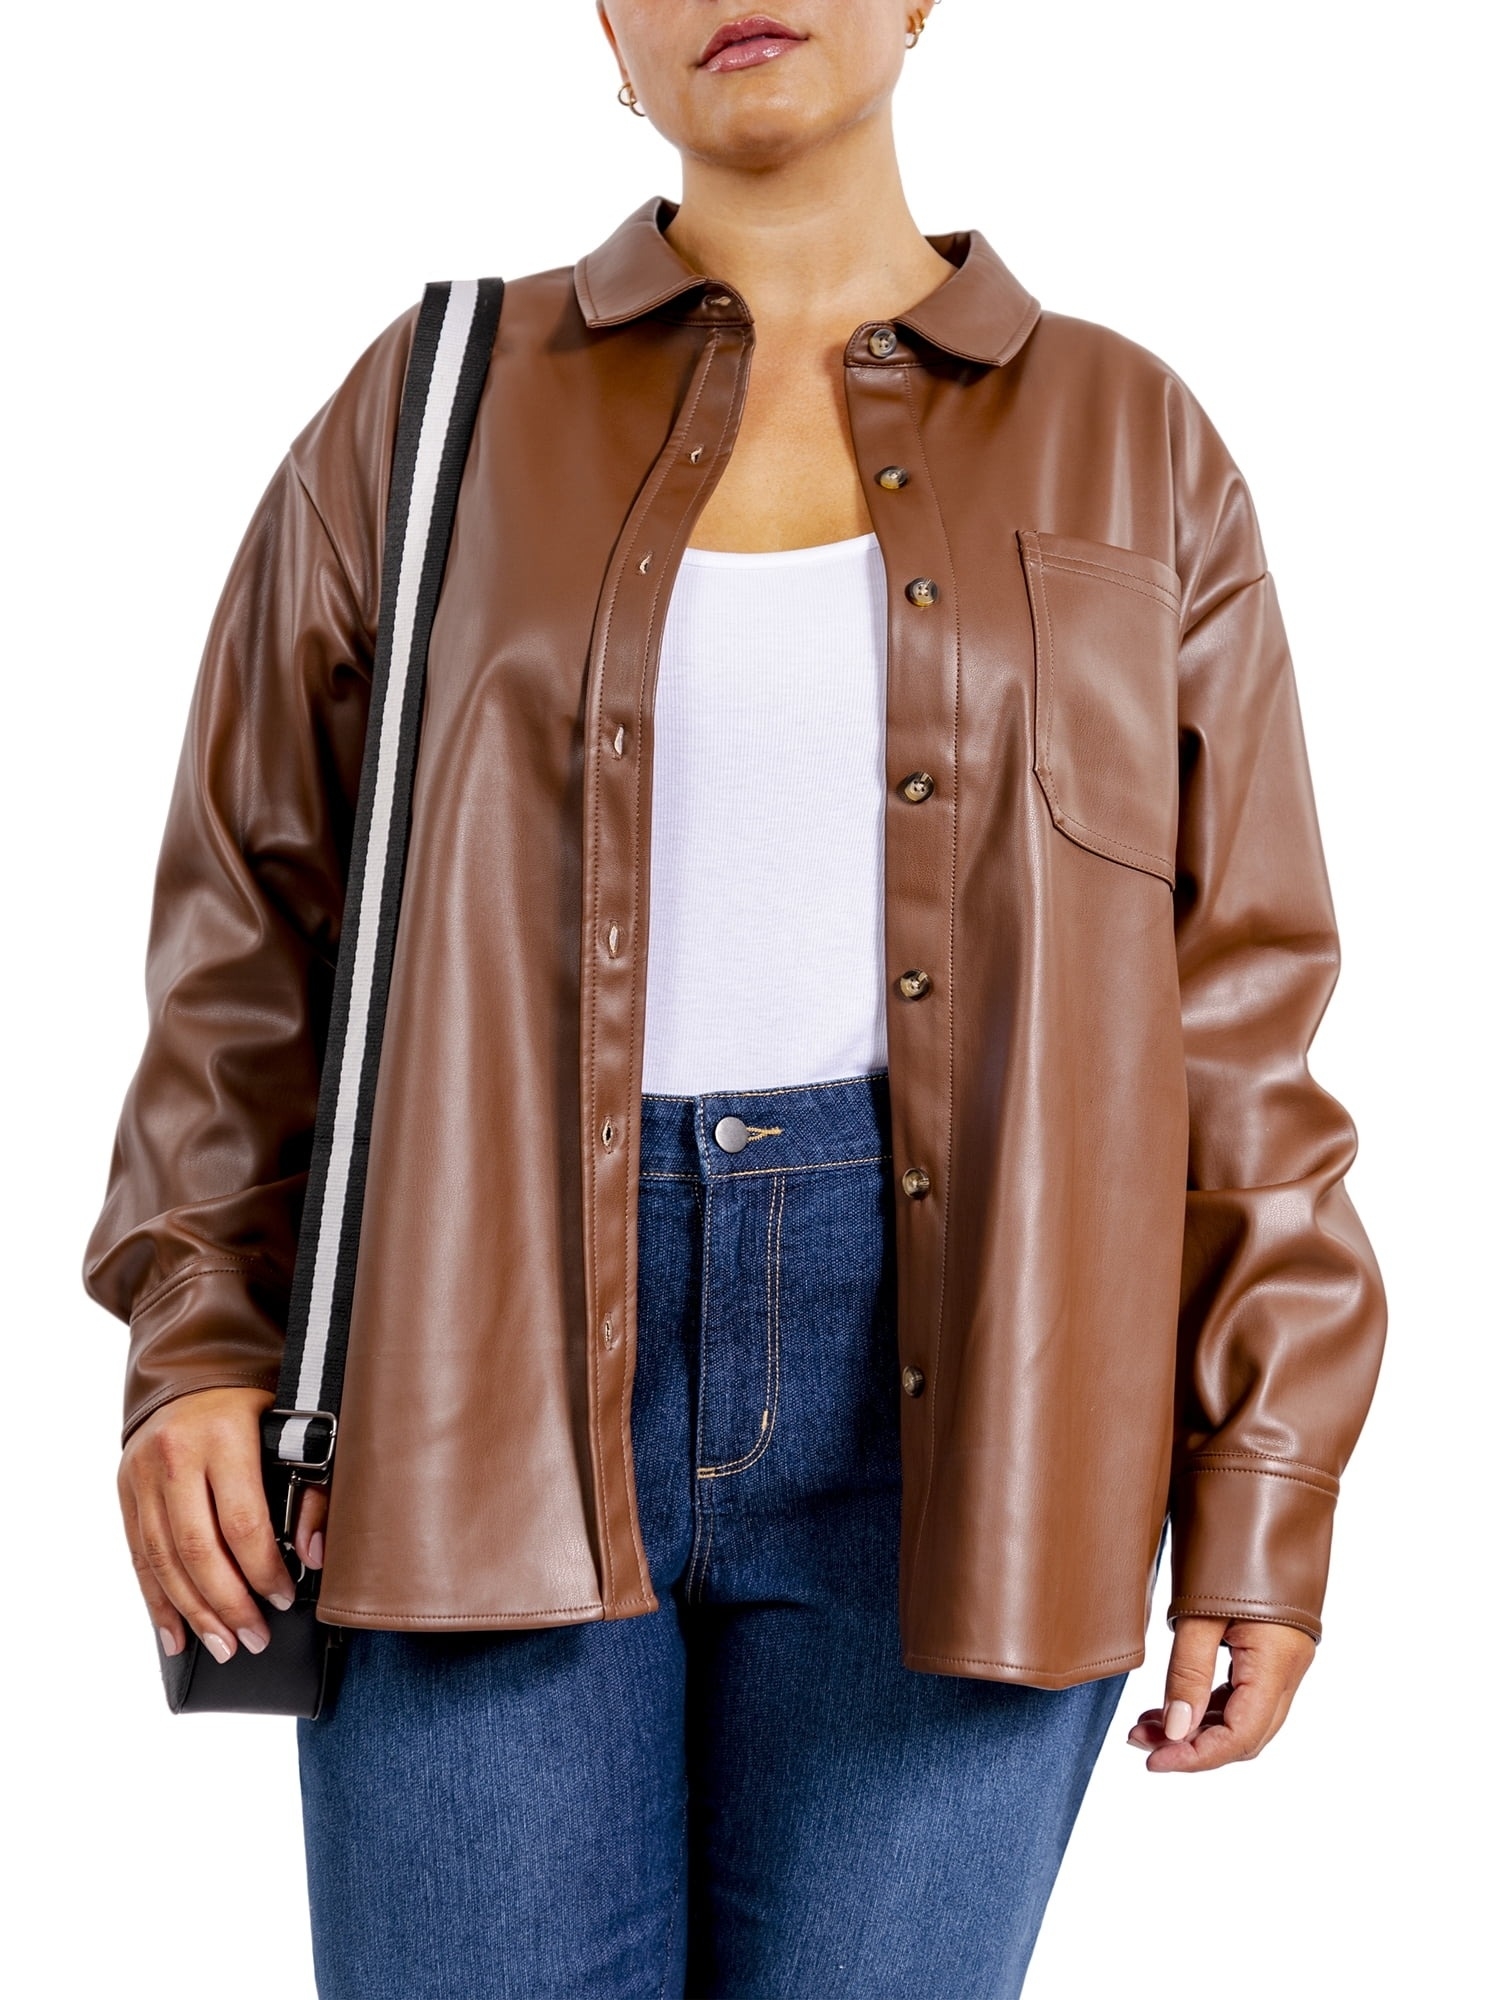 Model in a faux leather shirt jacket, white top, and jeans